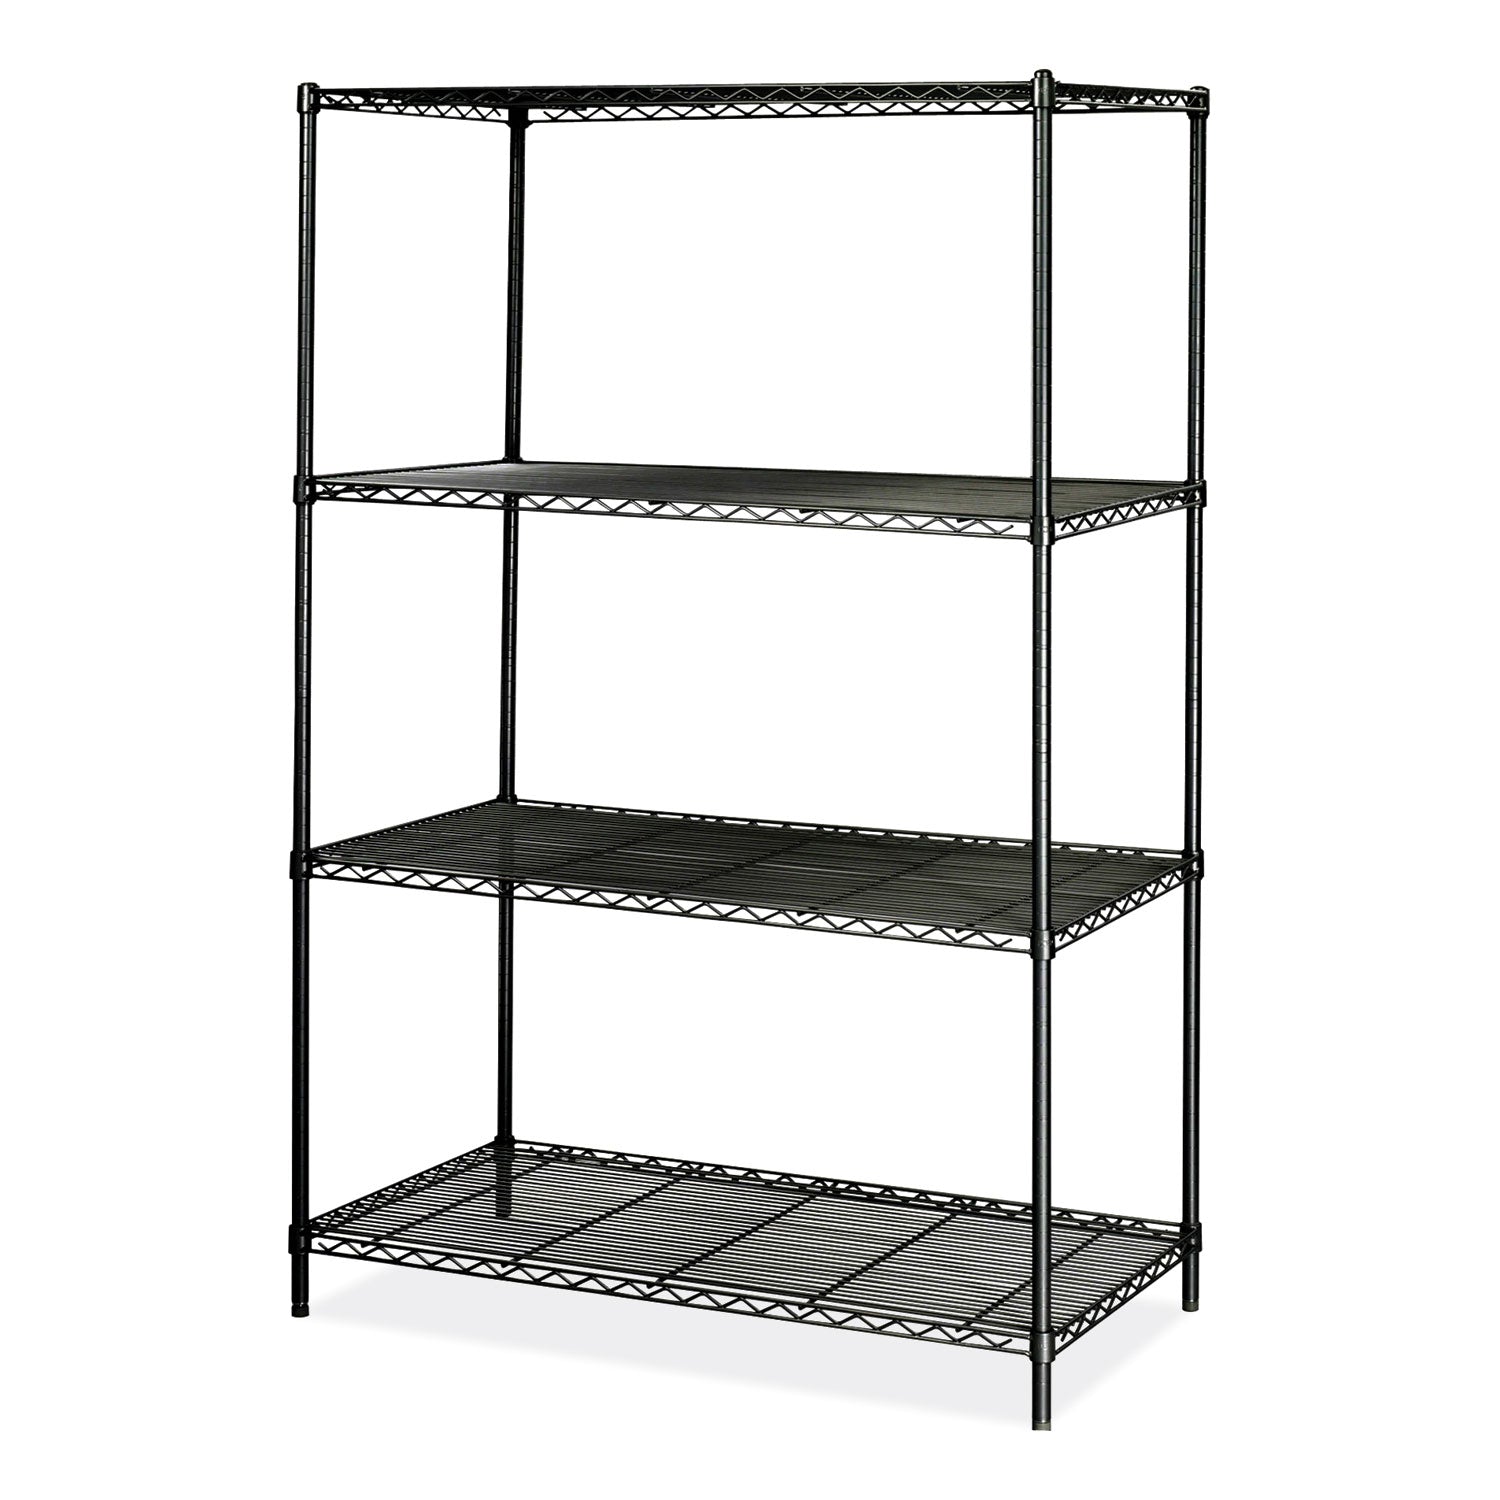 Industrial Wire Shelving, Four-Shelf, 48w x 24d x 72h, Black, Ships in 1-3 Business Days - 